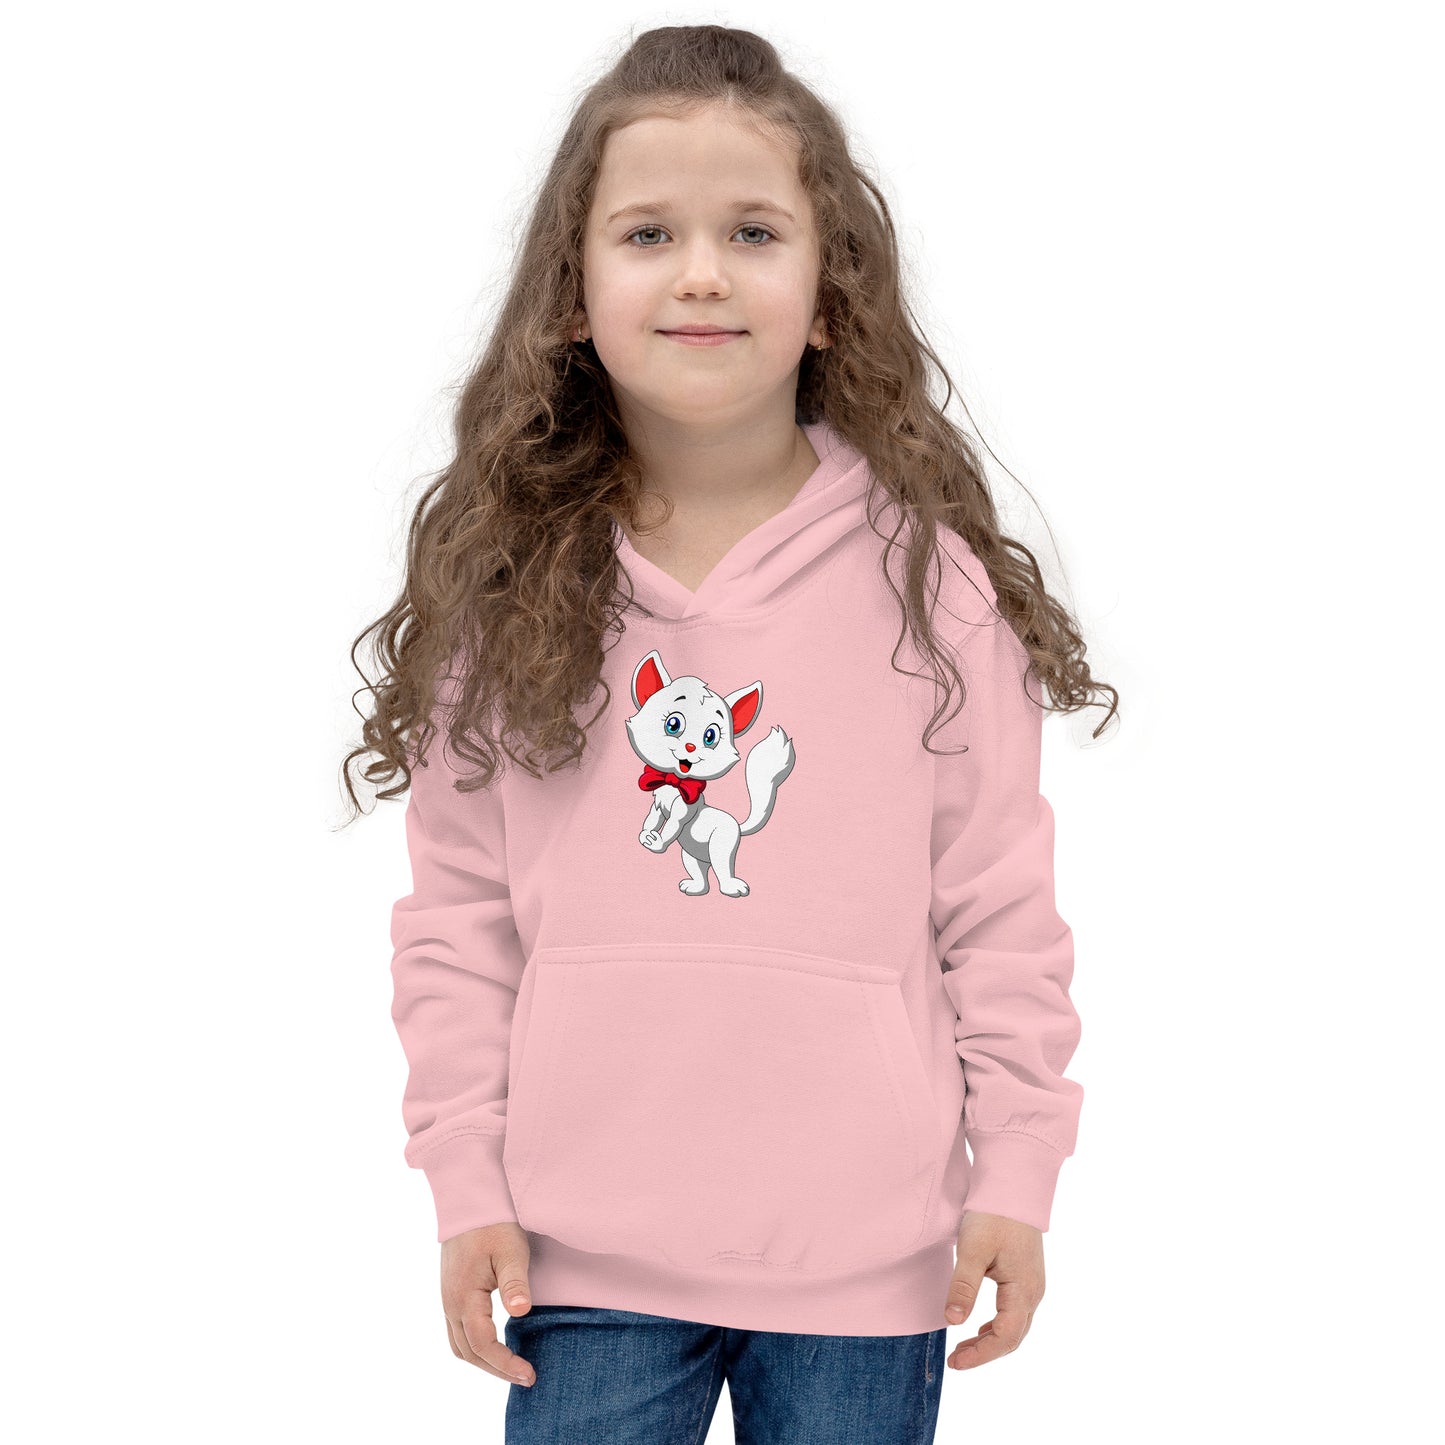 Lovely Kitty Cat Hoodie, No. 0542